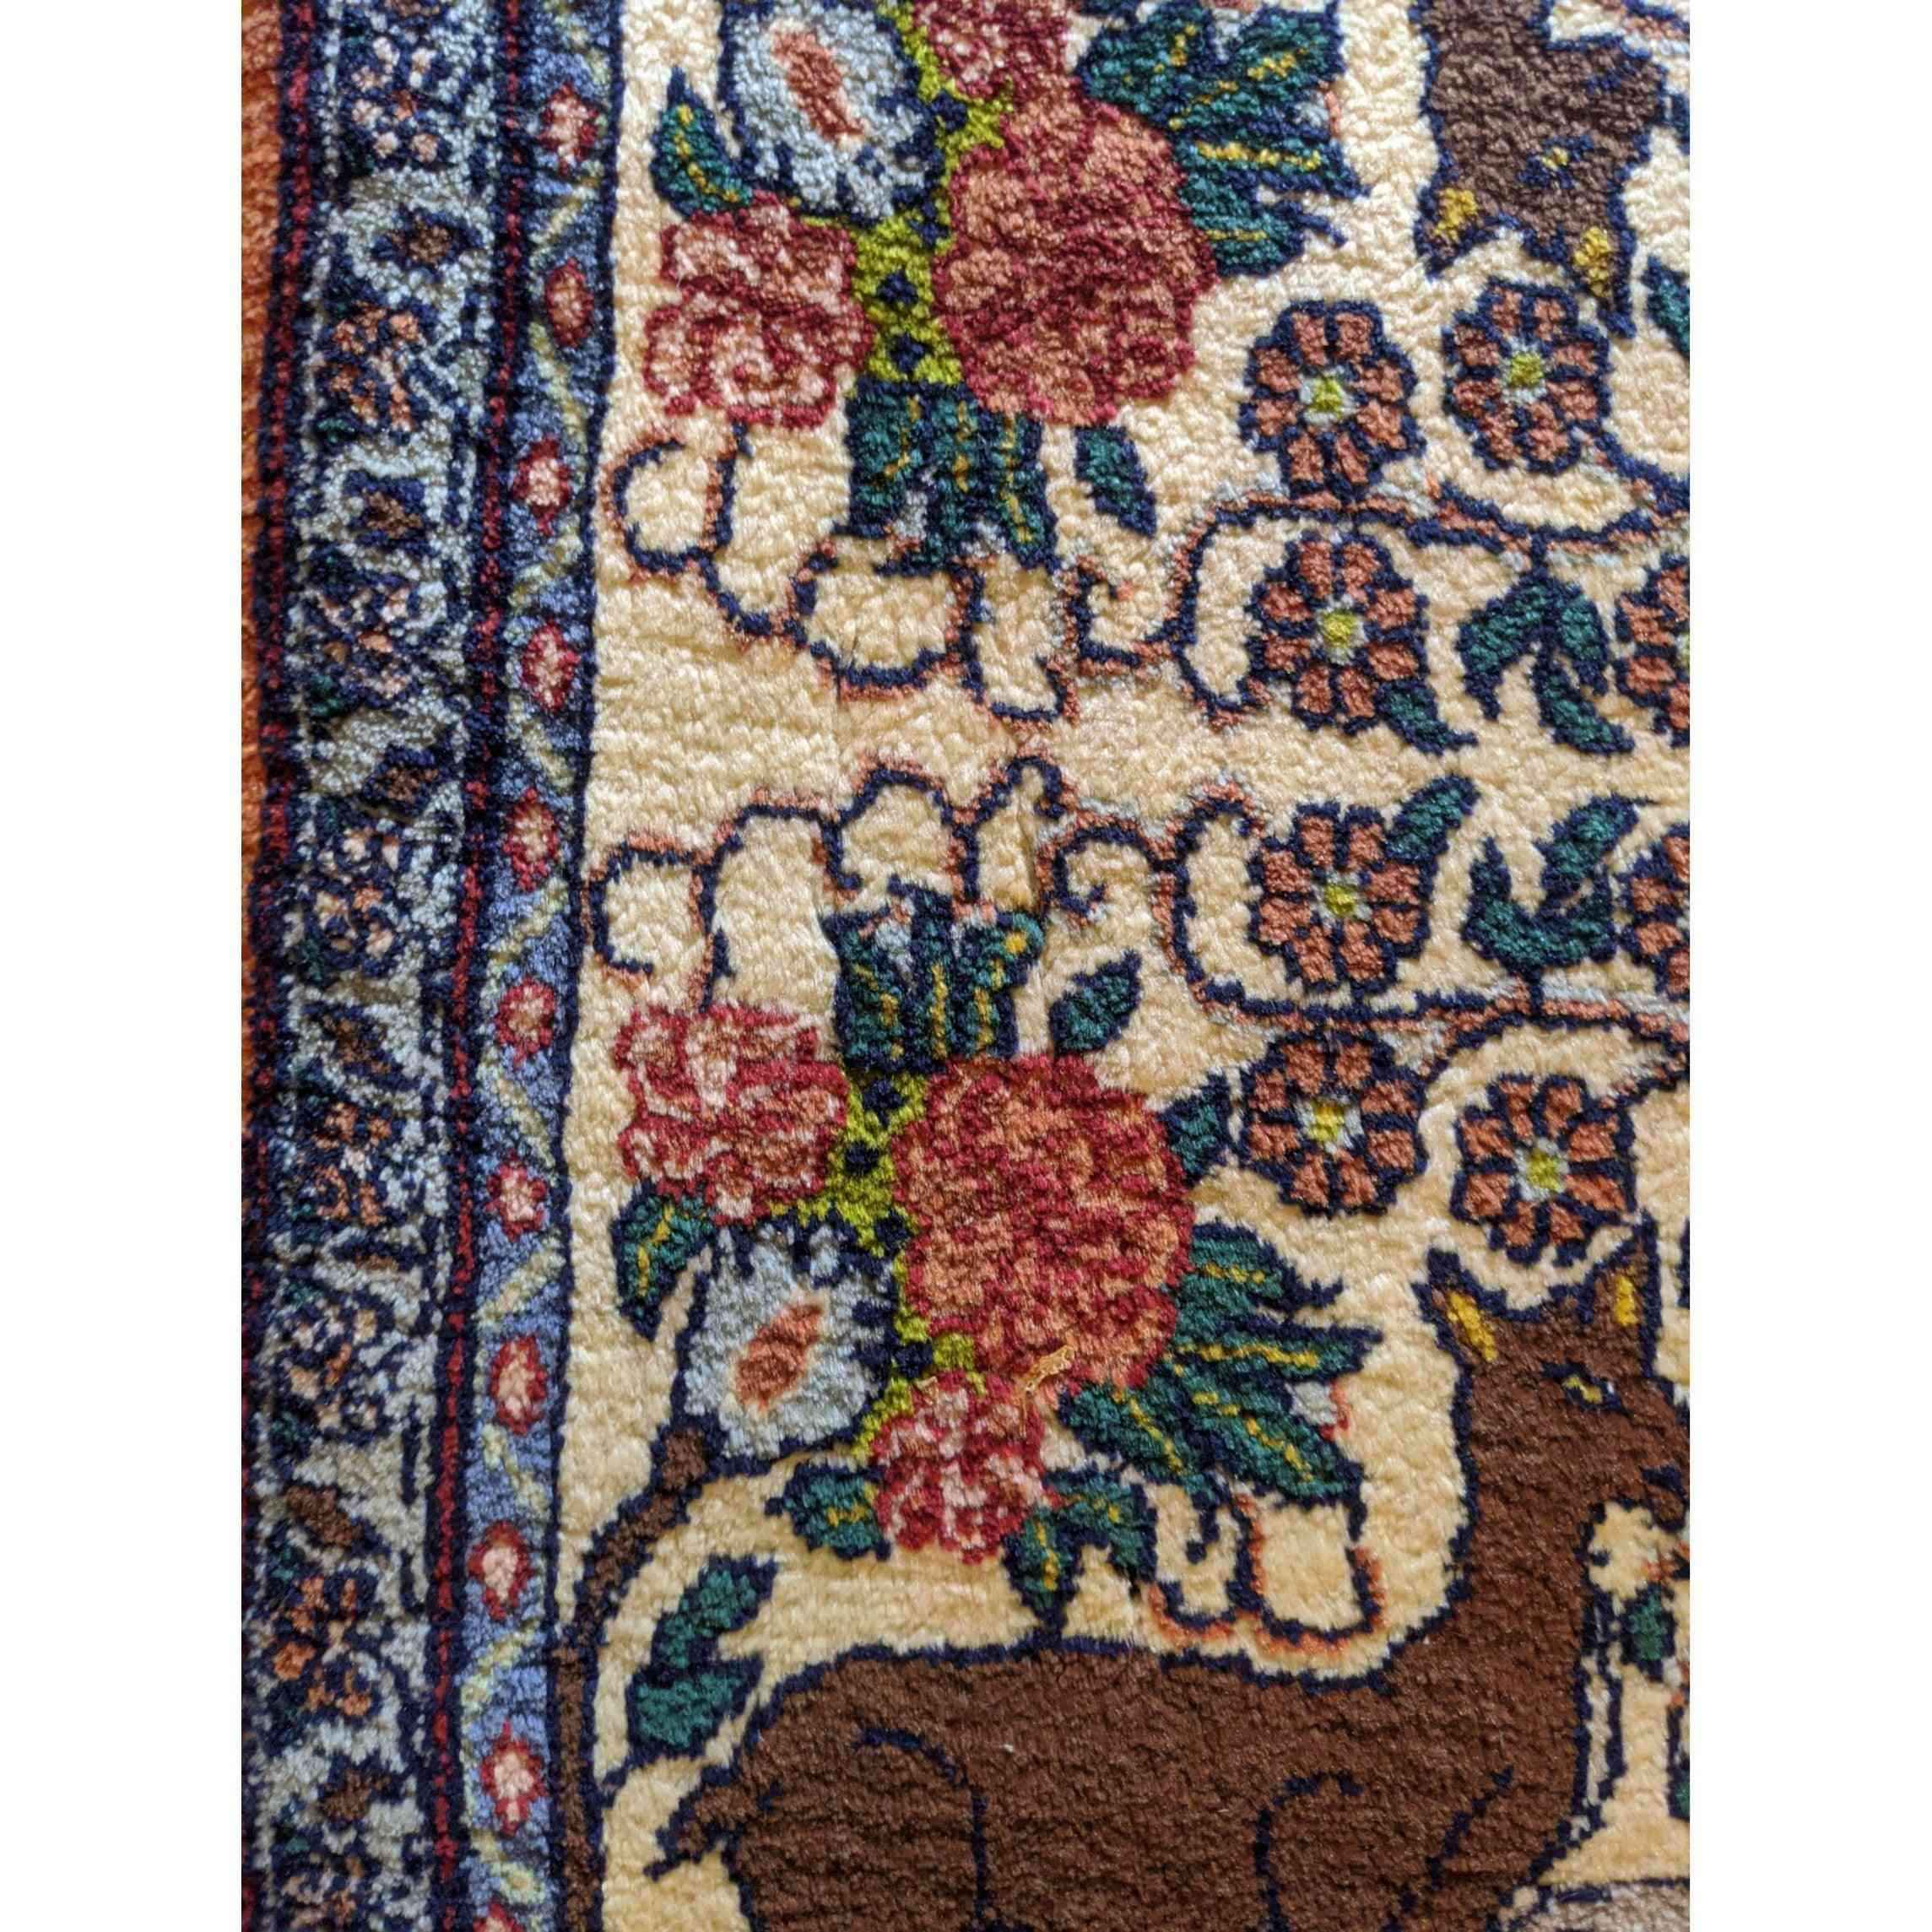 86 x 68 cm Persian Qum Traditional Yellow Small Rug - Rugmaster